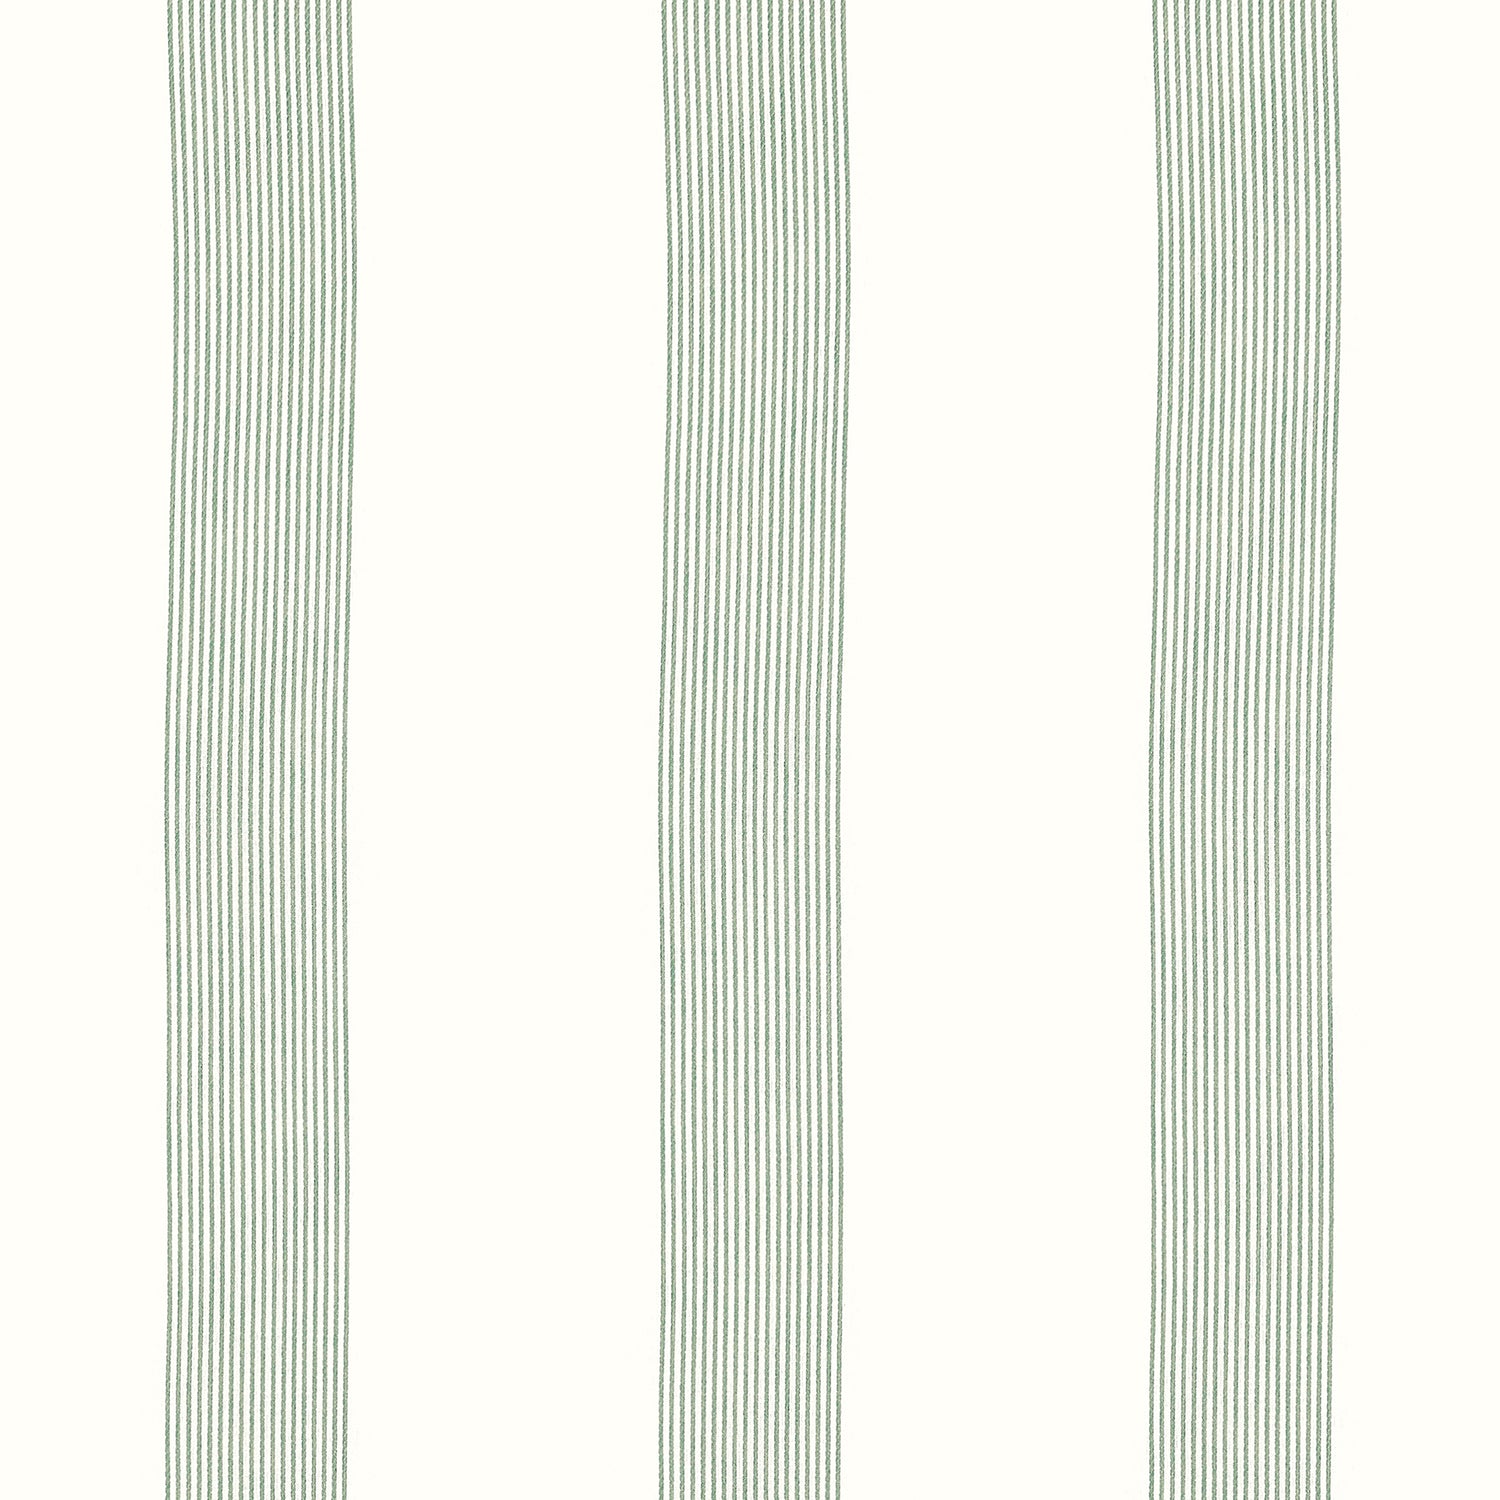 Sabine fabric in stripe aloe color - pattern number FWW81735 - by Thibaut in the Locale Wide Width collection